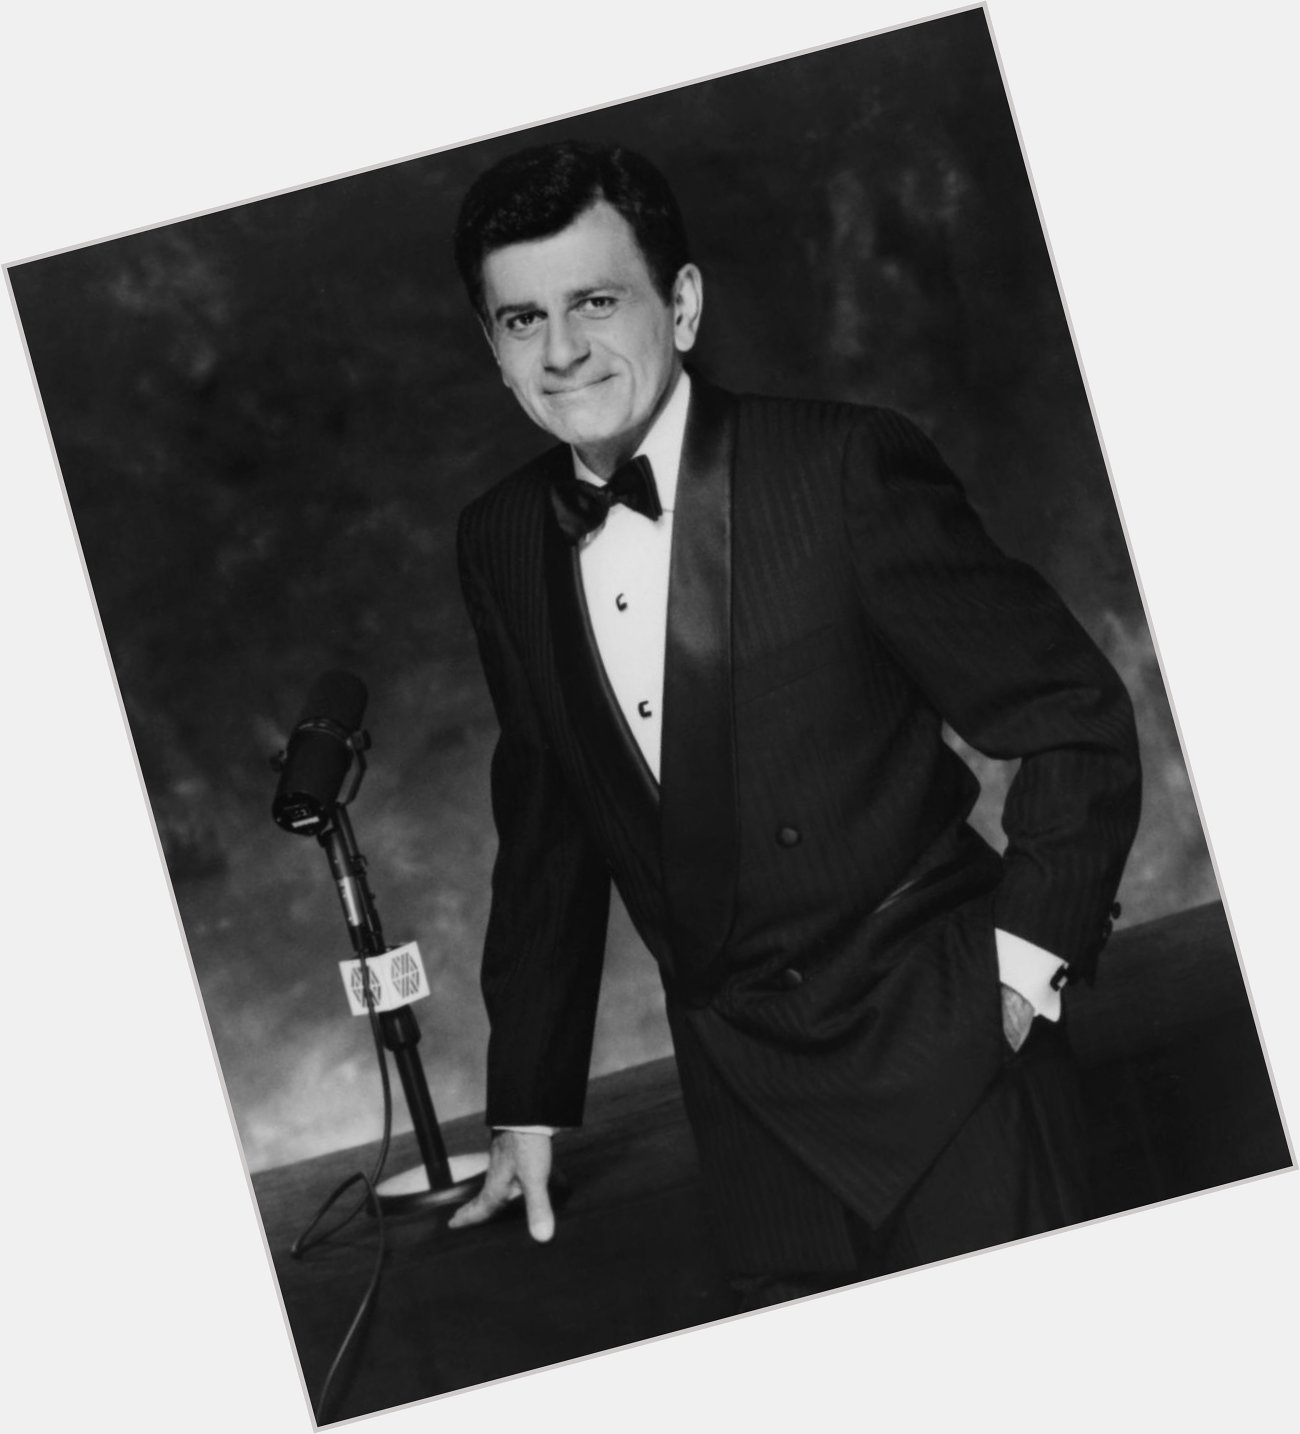 Happy Birthday to Casey Kasem, who would have turned 85 today! 